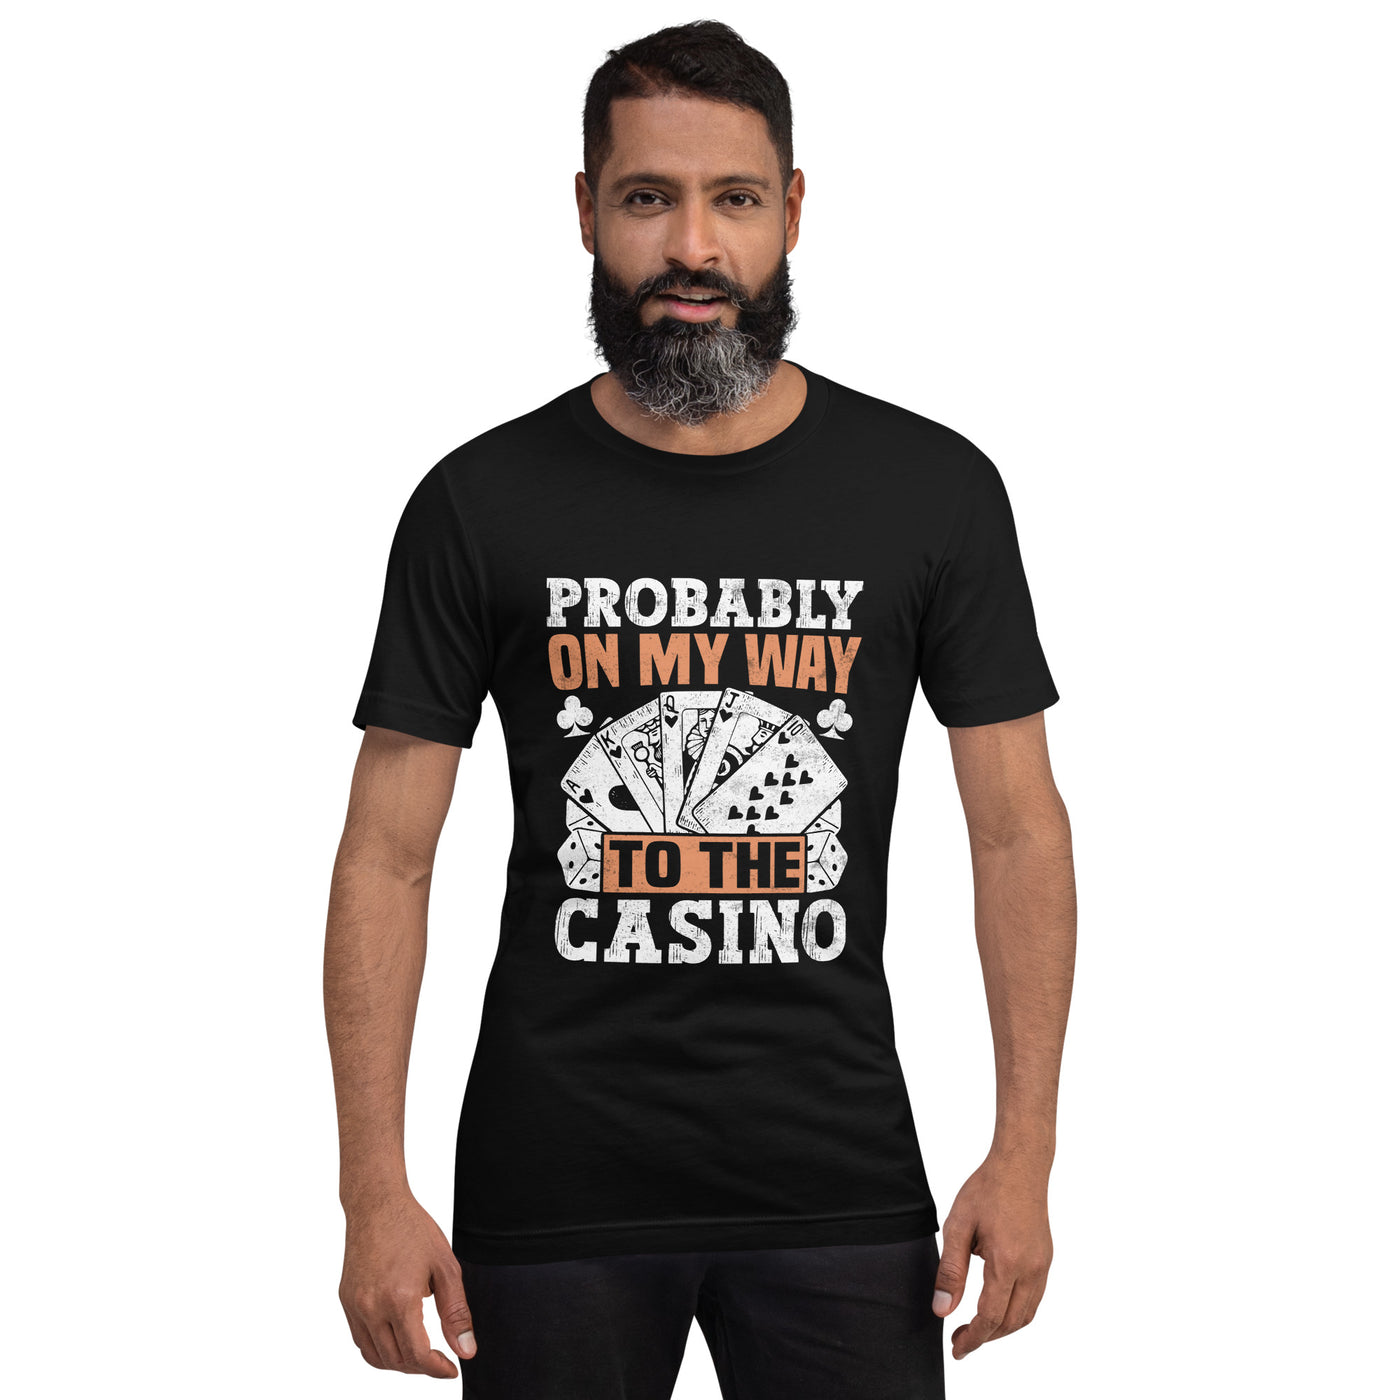 Probably, my way to the Casino - Unisex t-shirt